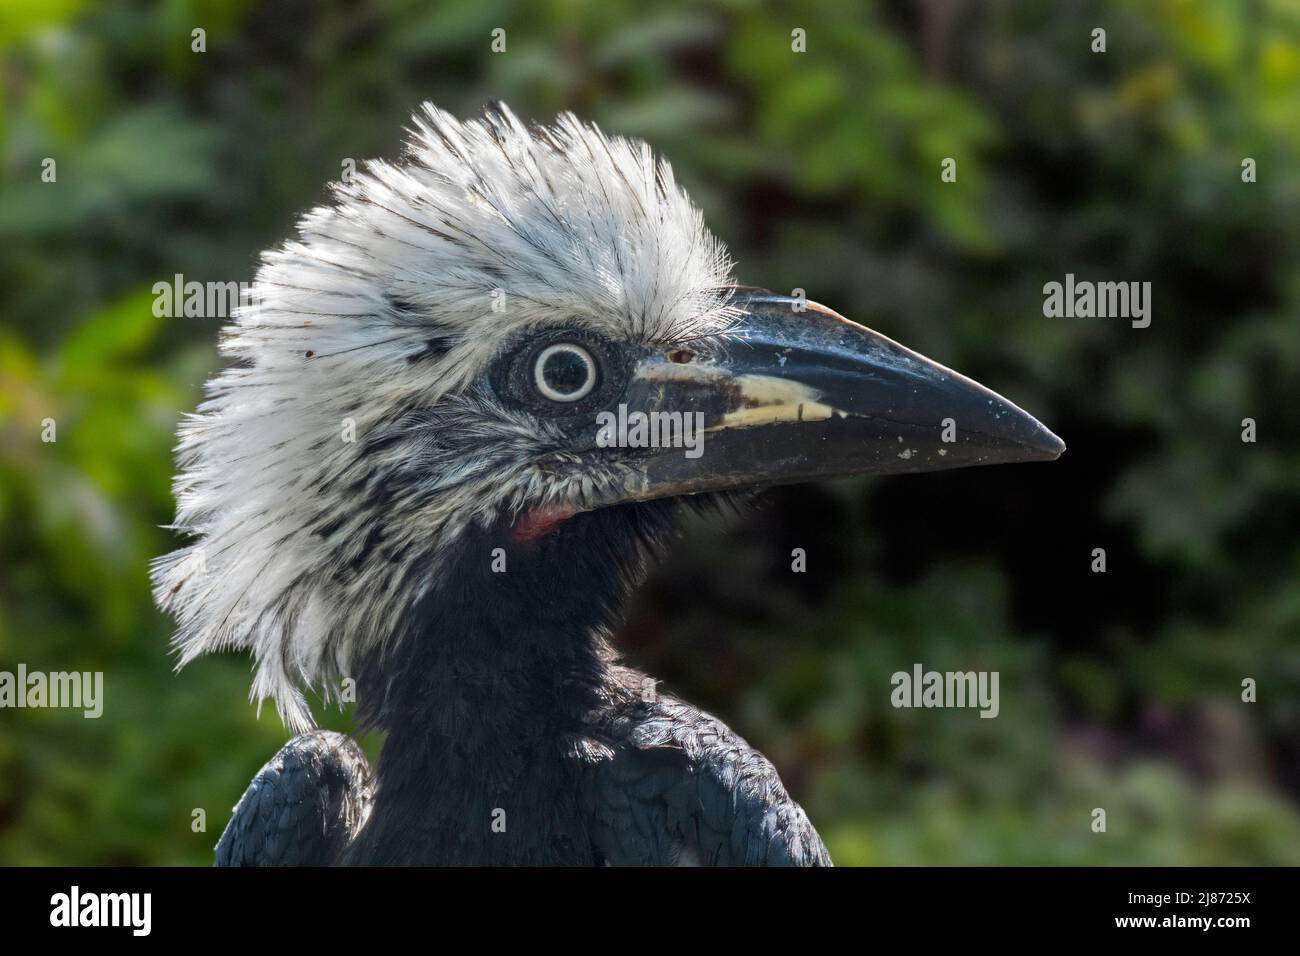 White-crested hornbill / Western long-tailed hornbill (Horizocerus albocristatus / Tockus albocristatus), native to Central and West Africa Stock Photo